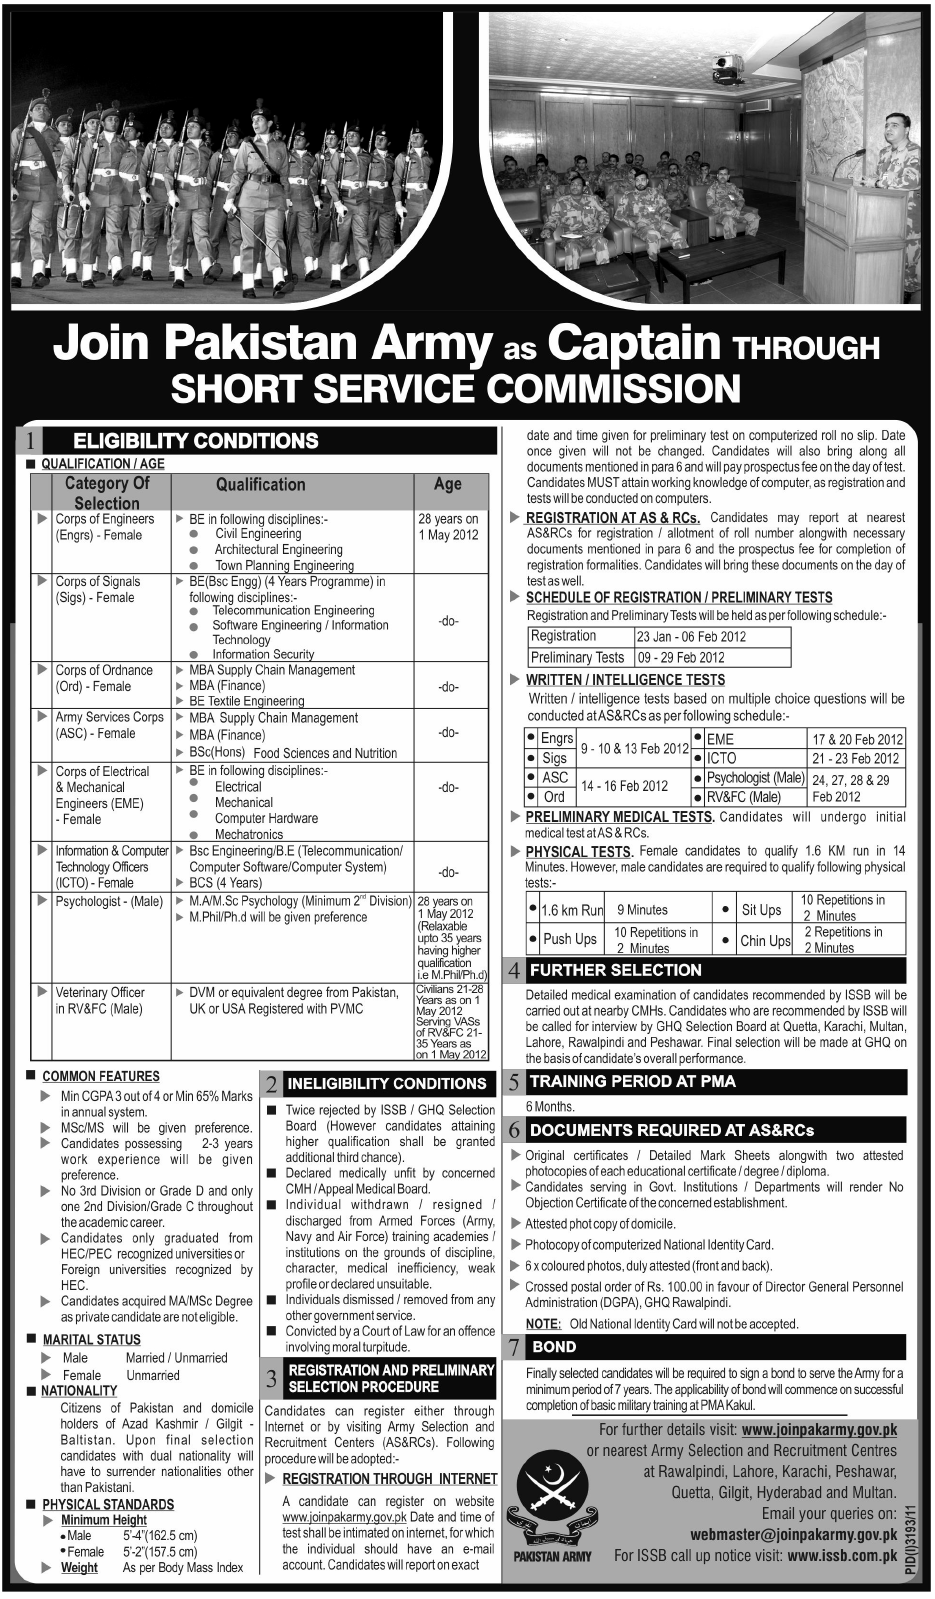 Join Pakistan Army as Captain Through Short Service Commission